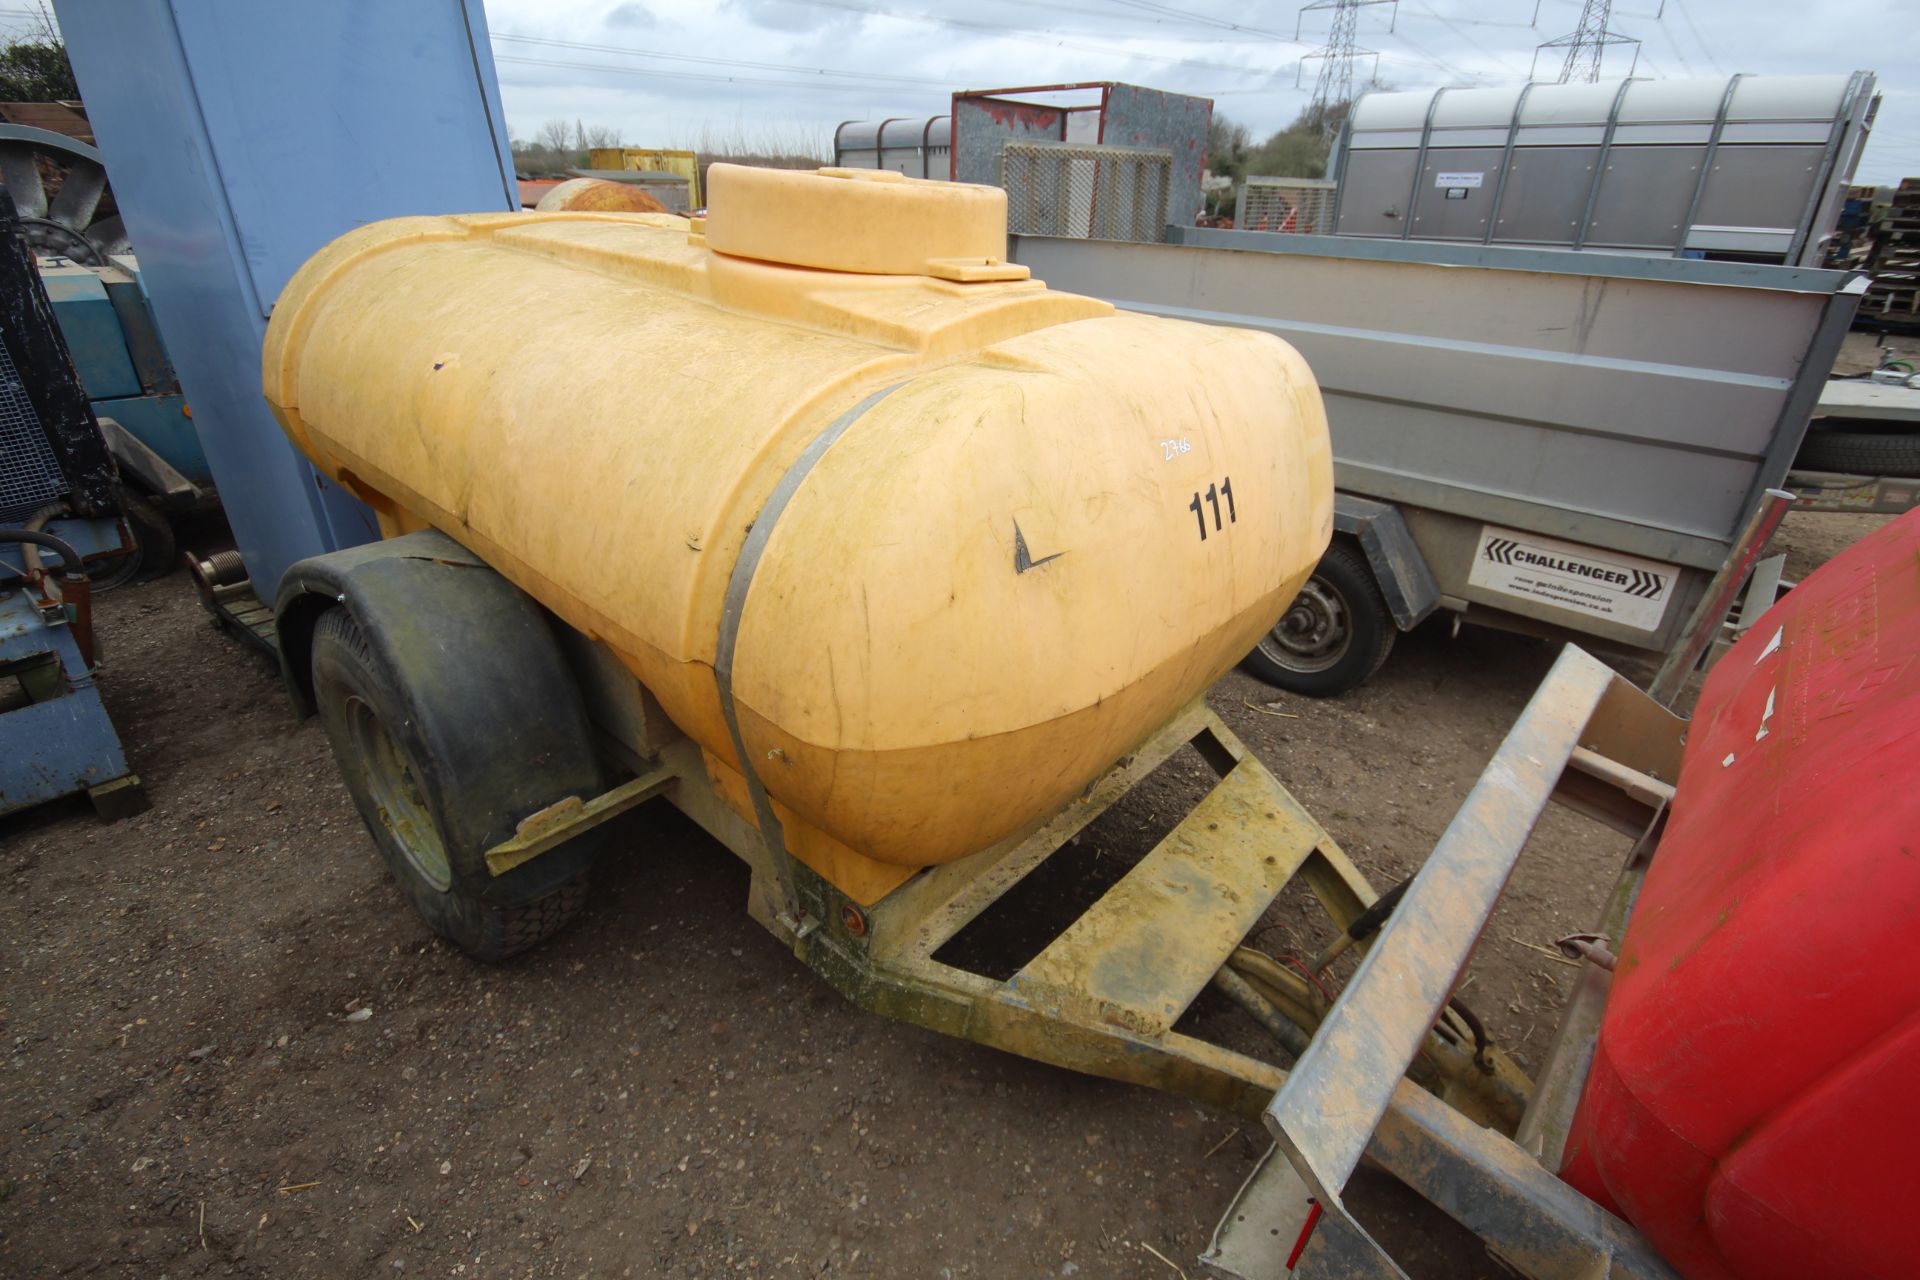 1,000L single axle fast tow water bowser. V